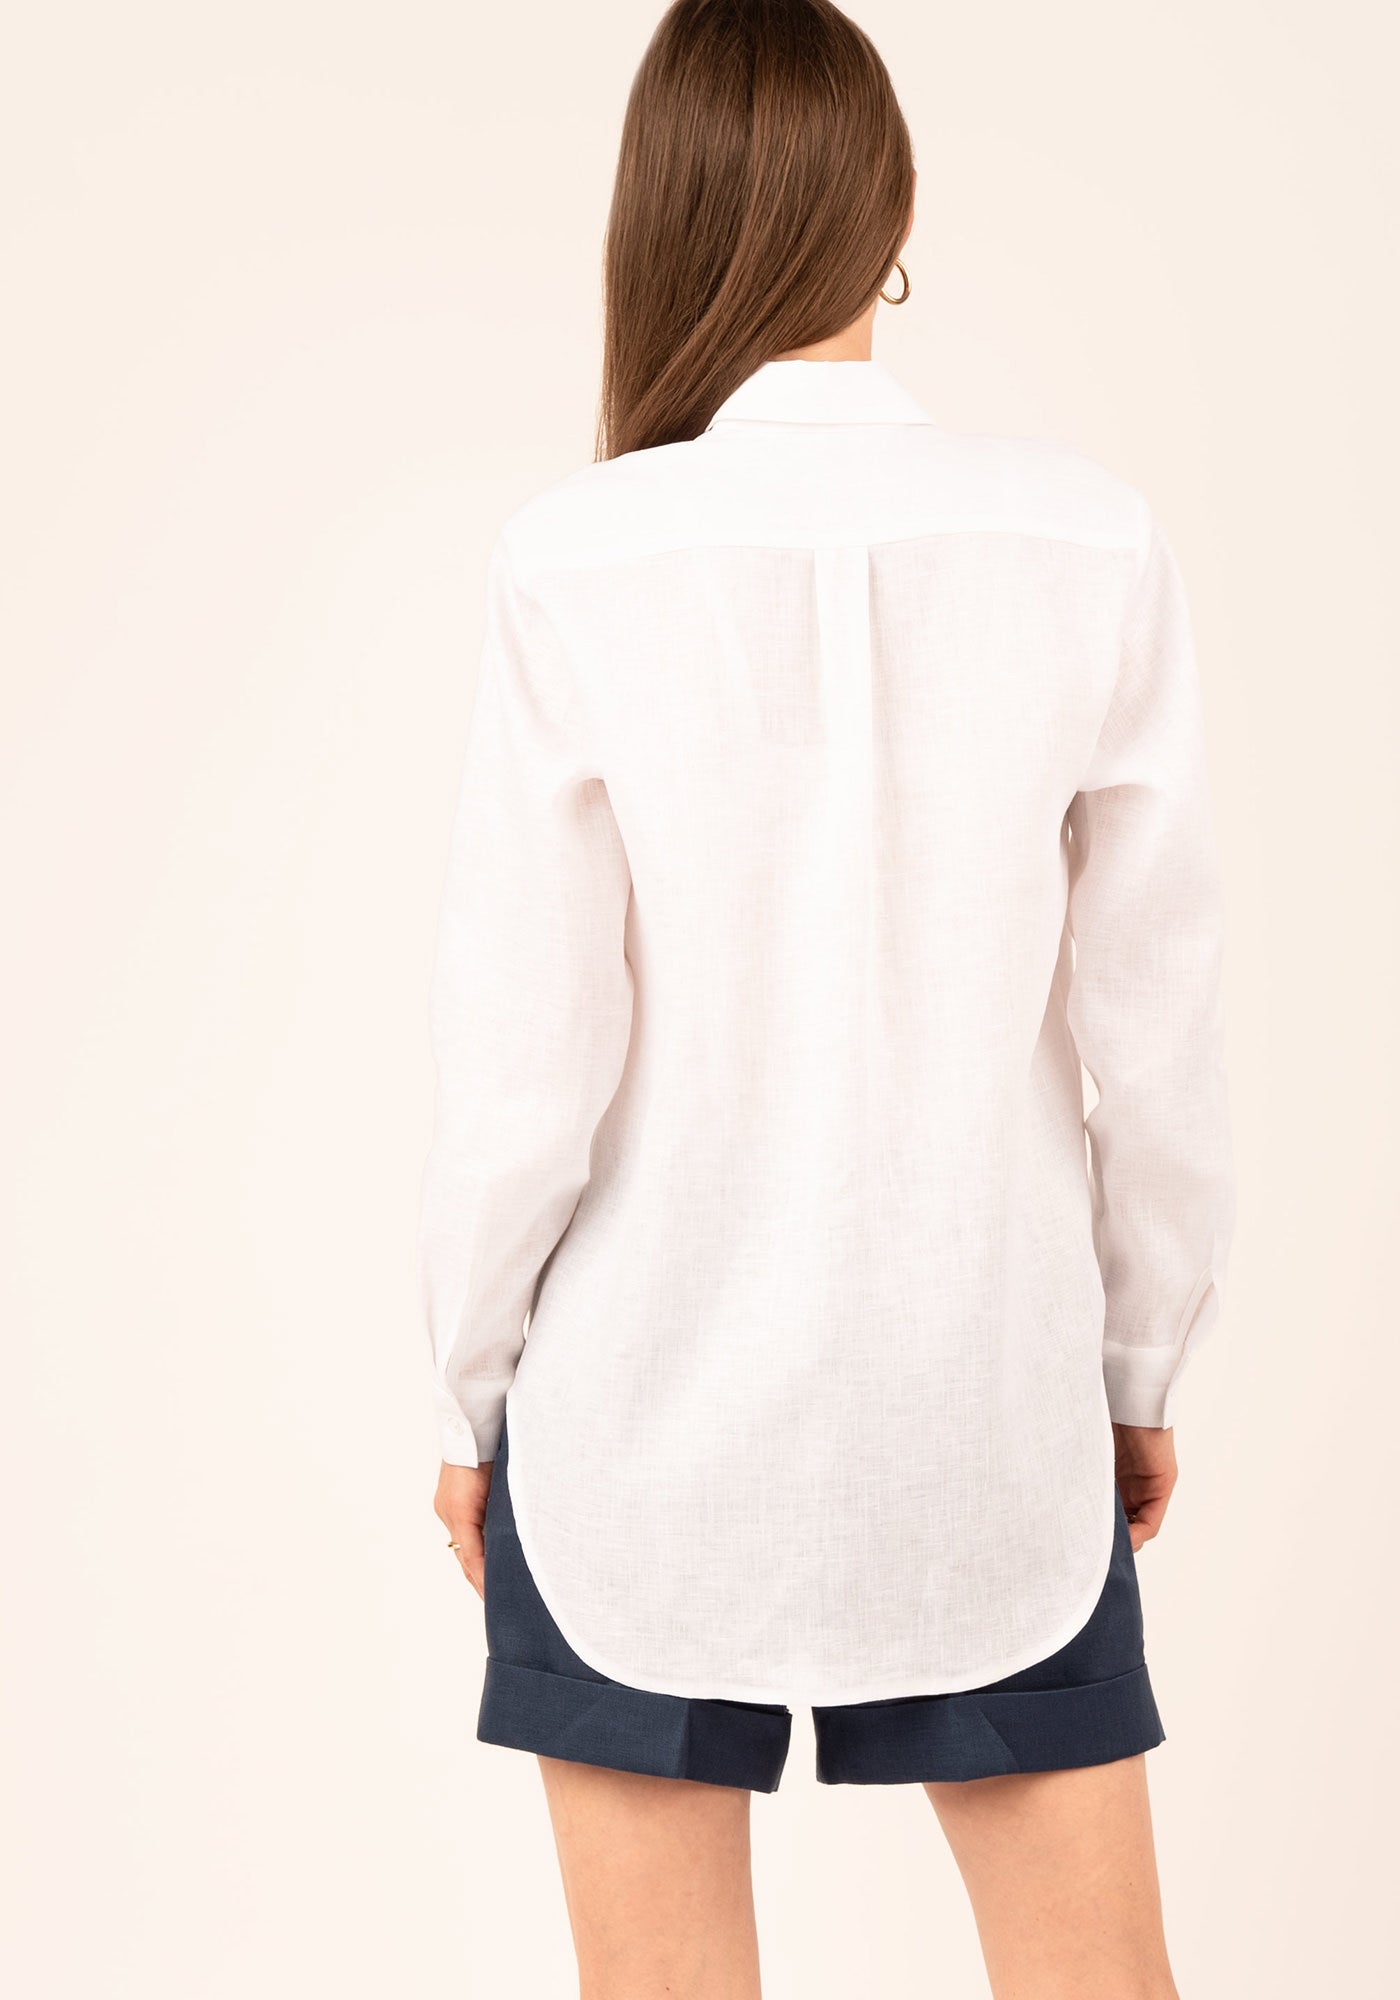 Women's Relaxed fit Linen Shirt in White